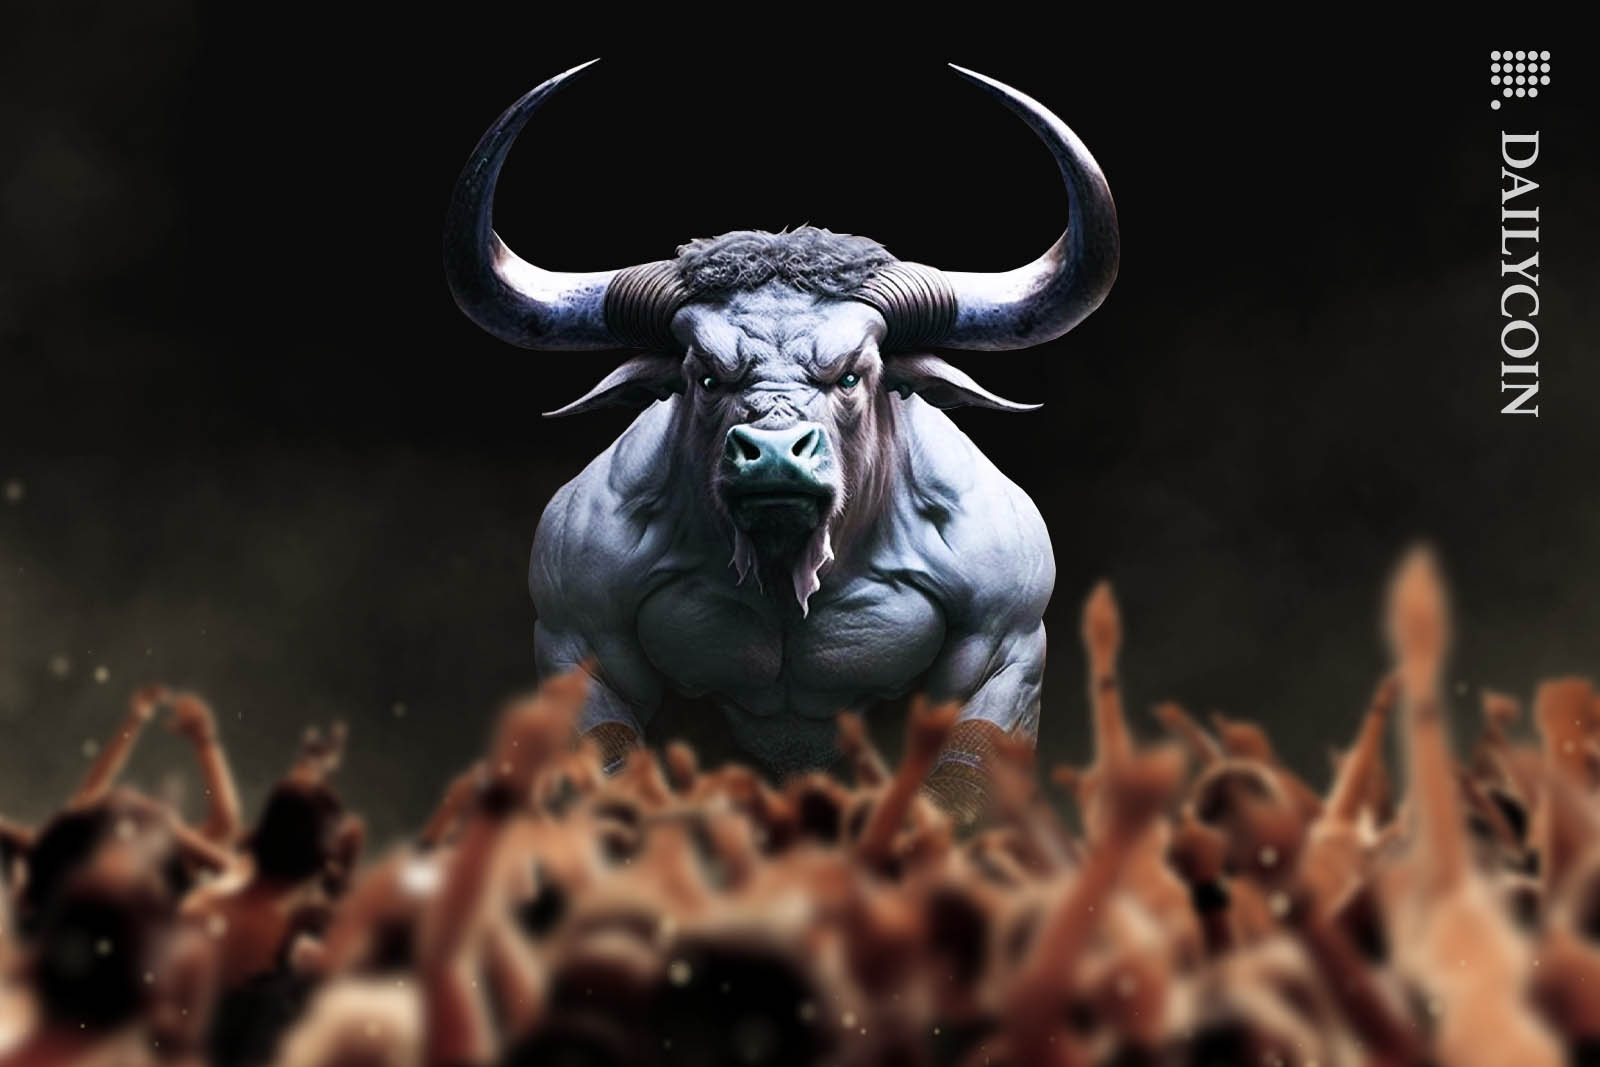 A bull with huge muscles being celebrated by a big crowd.